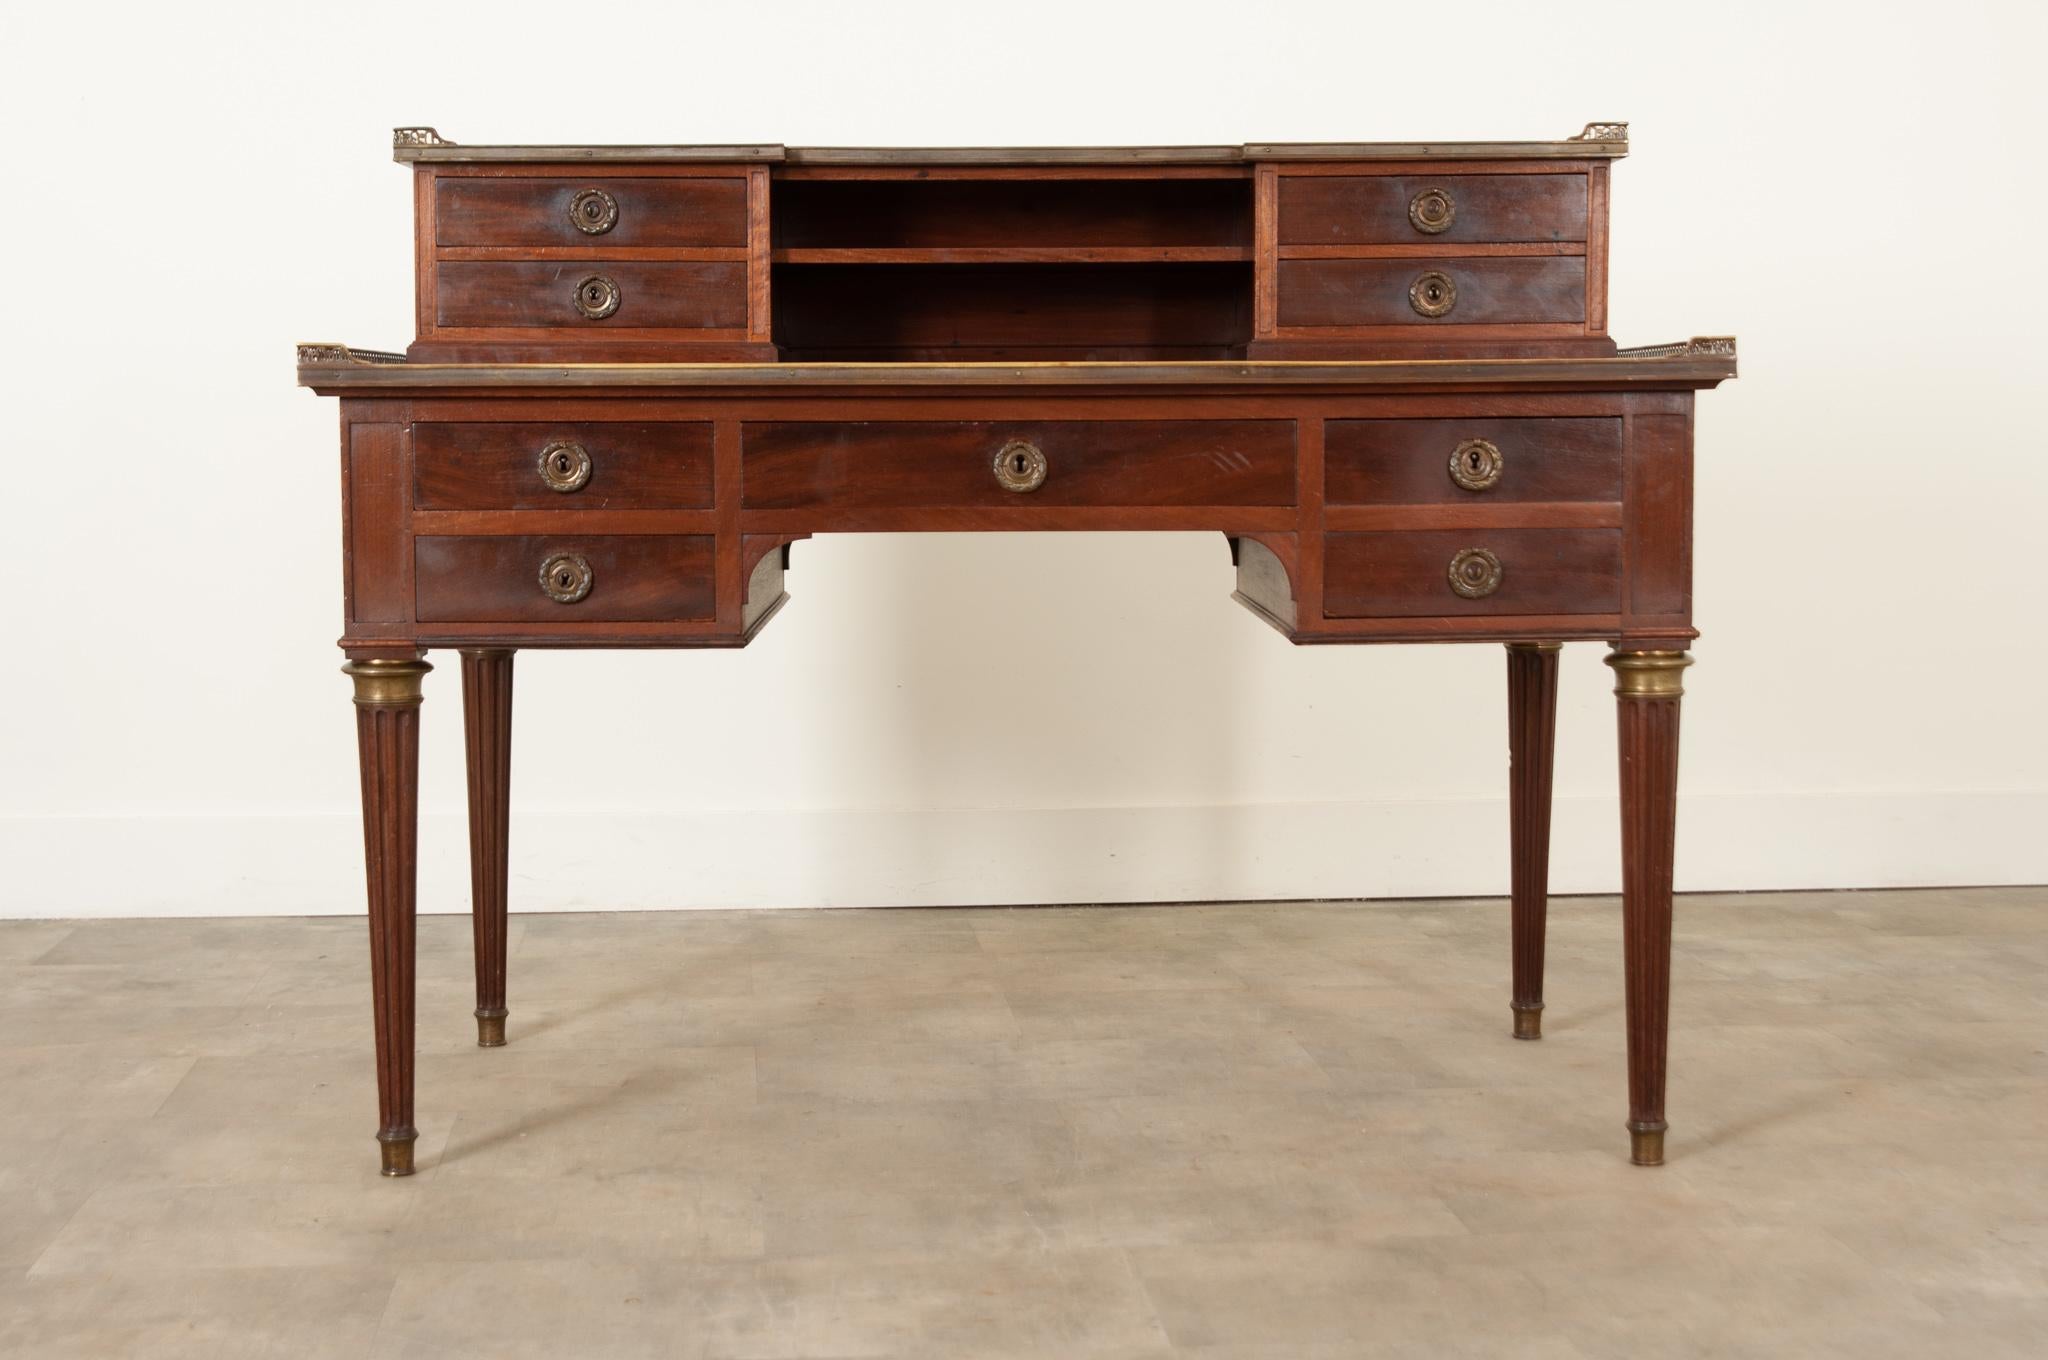 French 19th Century Louis XVI Style Mahogany Desk In Good Condition For Sale In Baton Rouge, LA